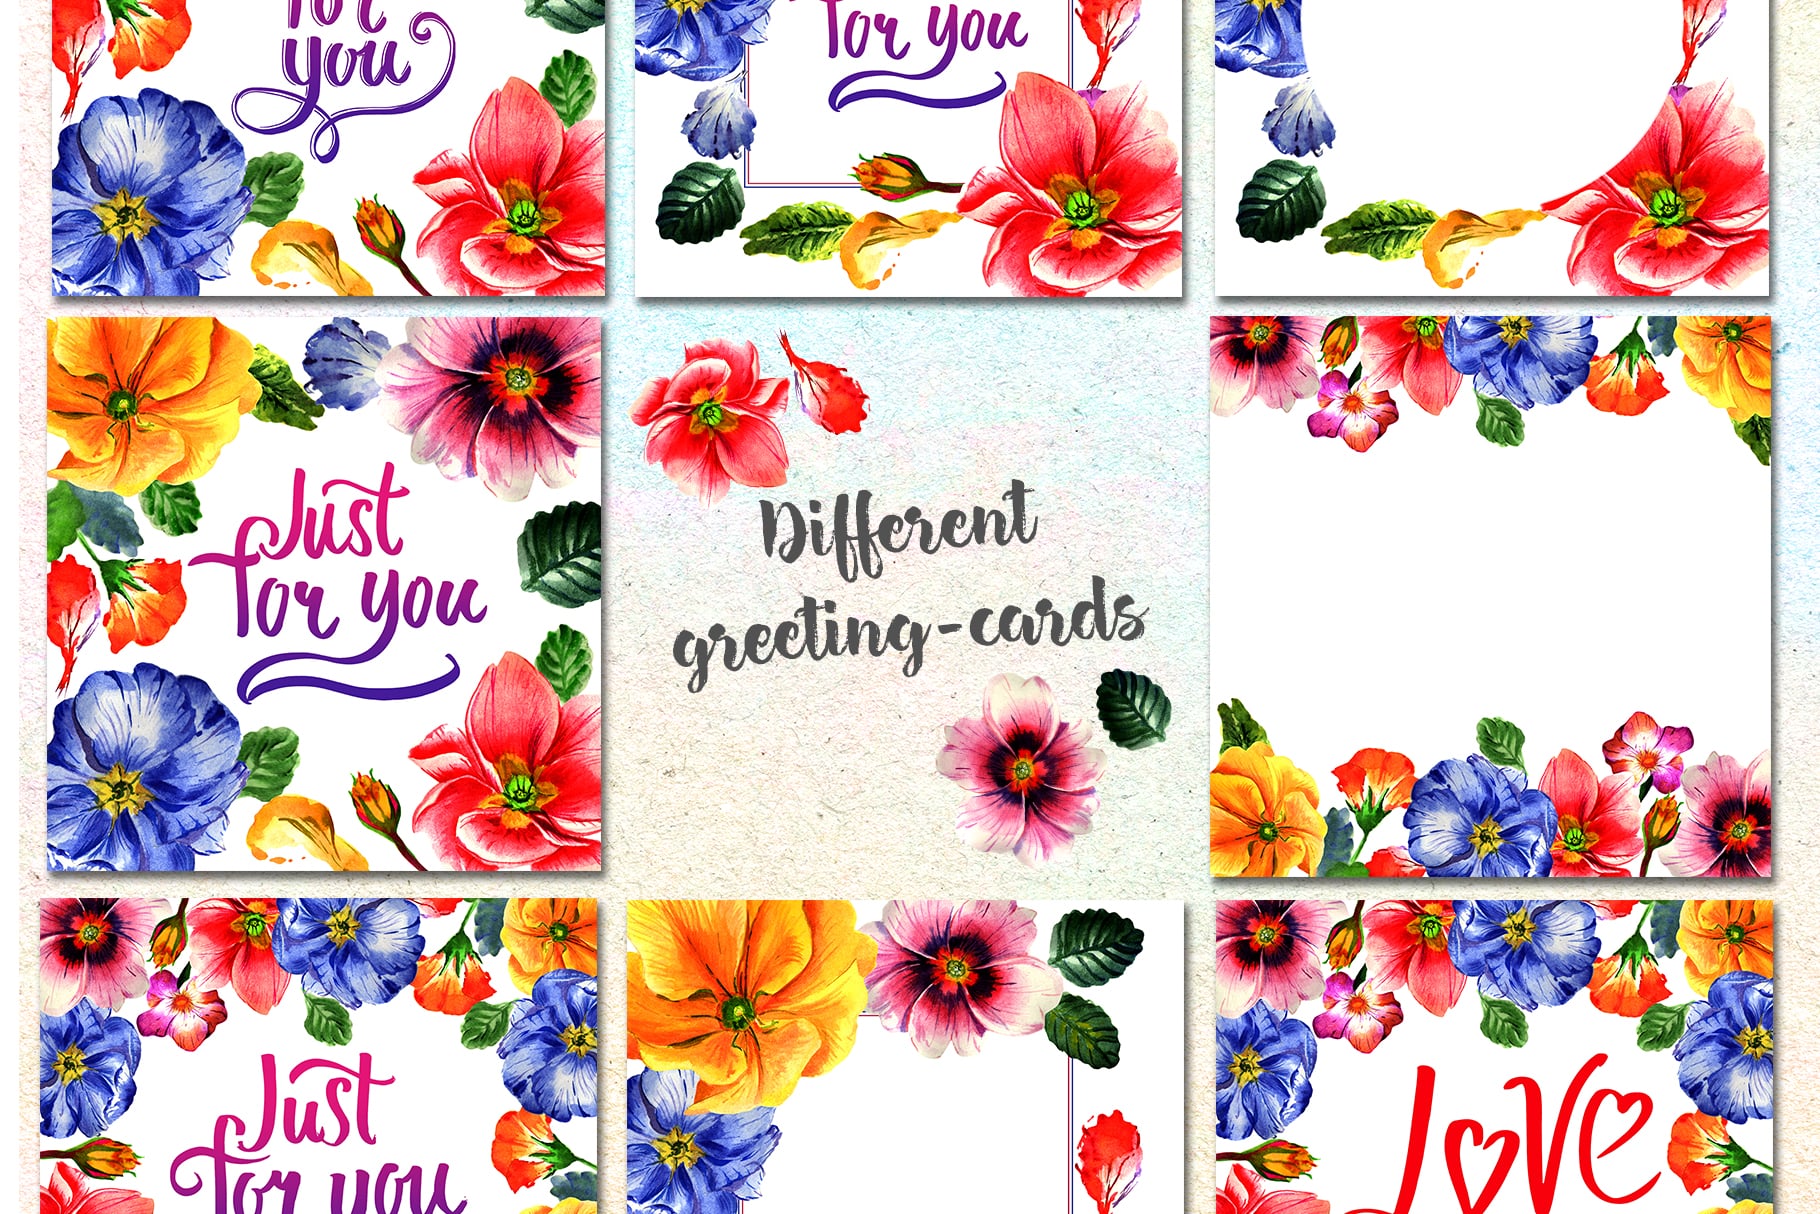 Different flowers greeting cards.